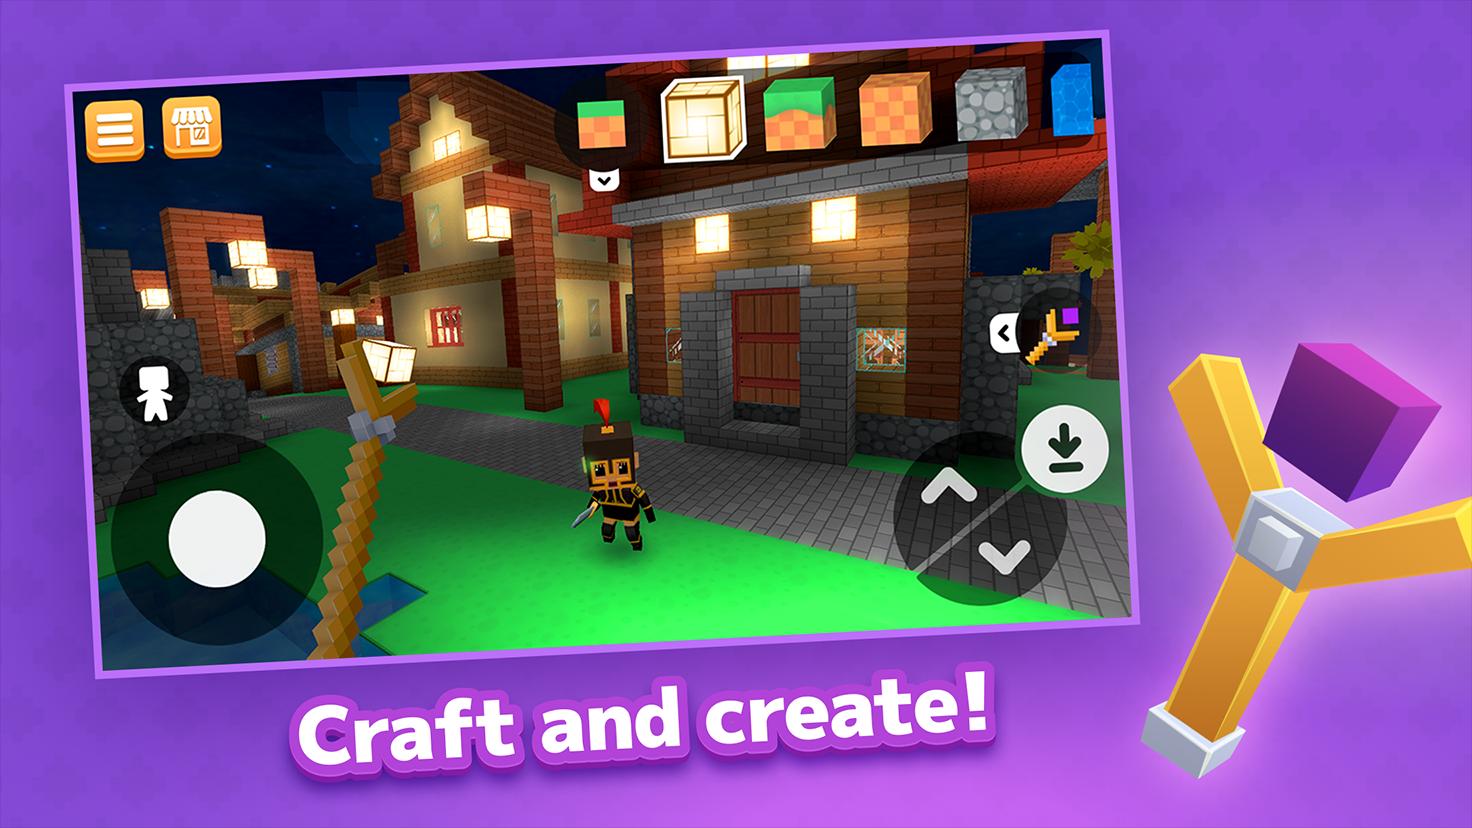 How to Download Crafty Lands, One of the Safest Kid-Friendly Games for Mobile